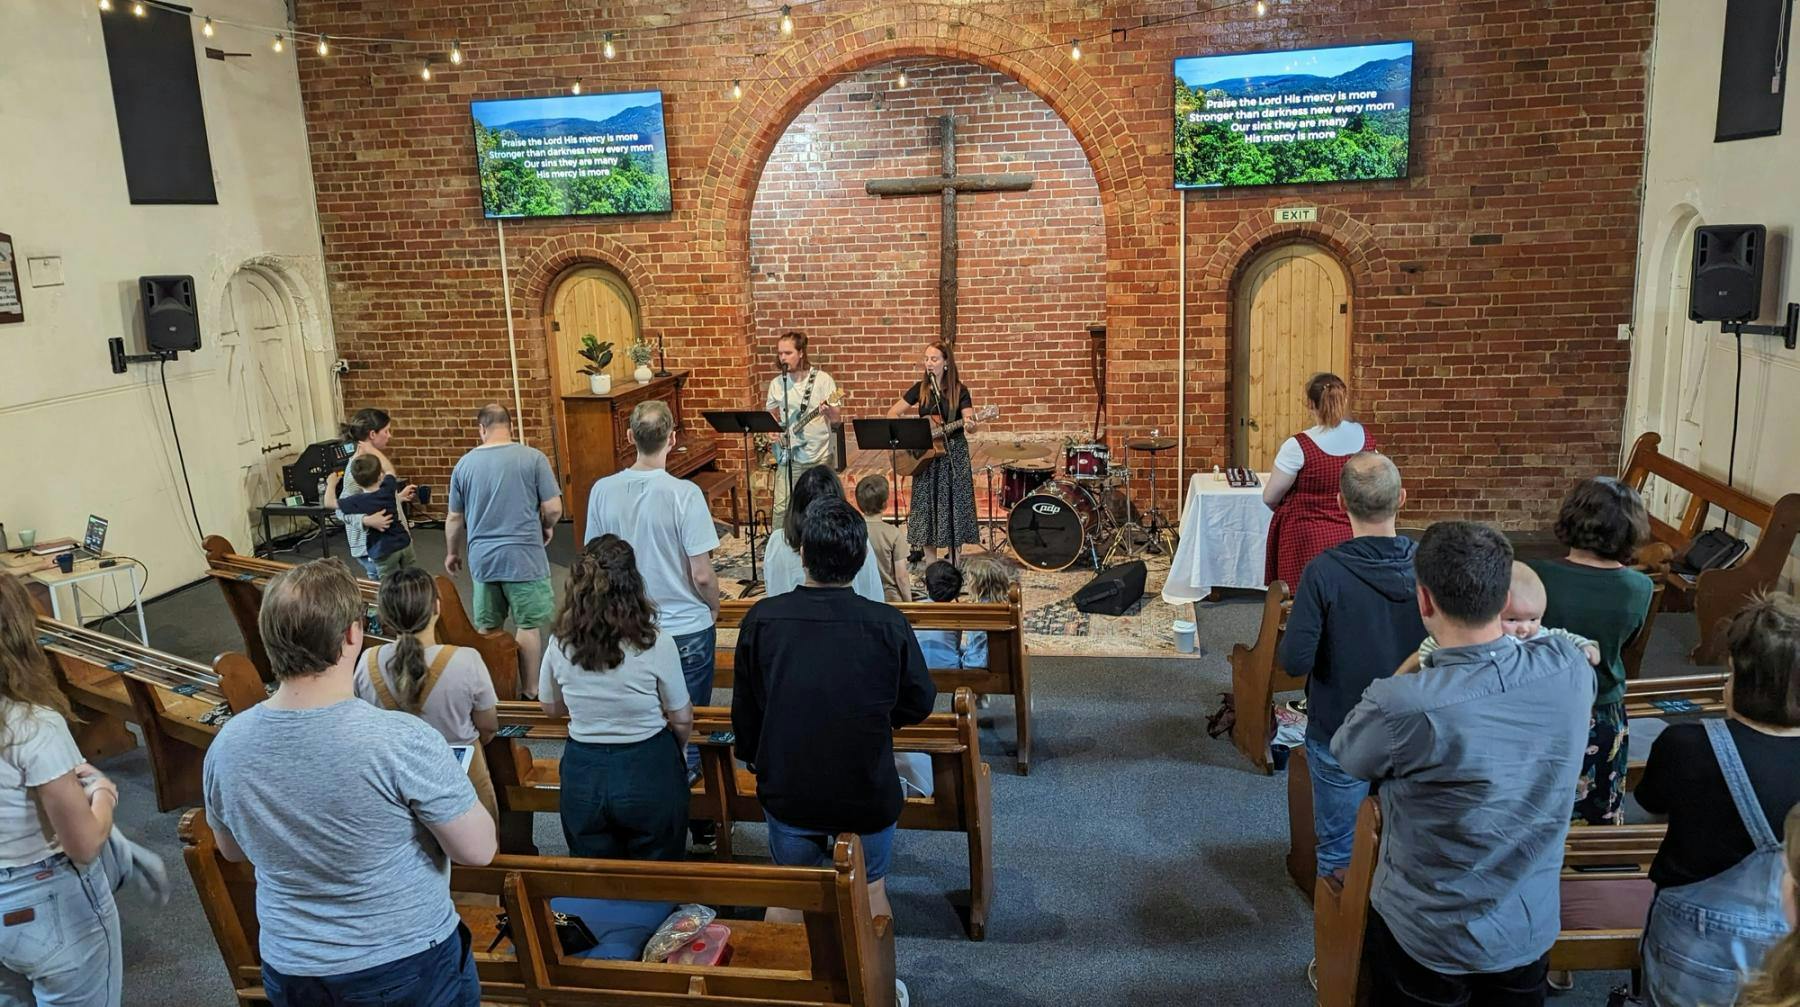 A group of people standing and singing in a church building